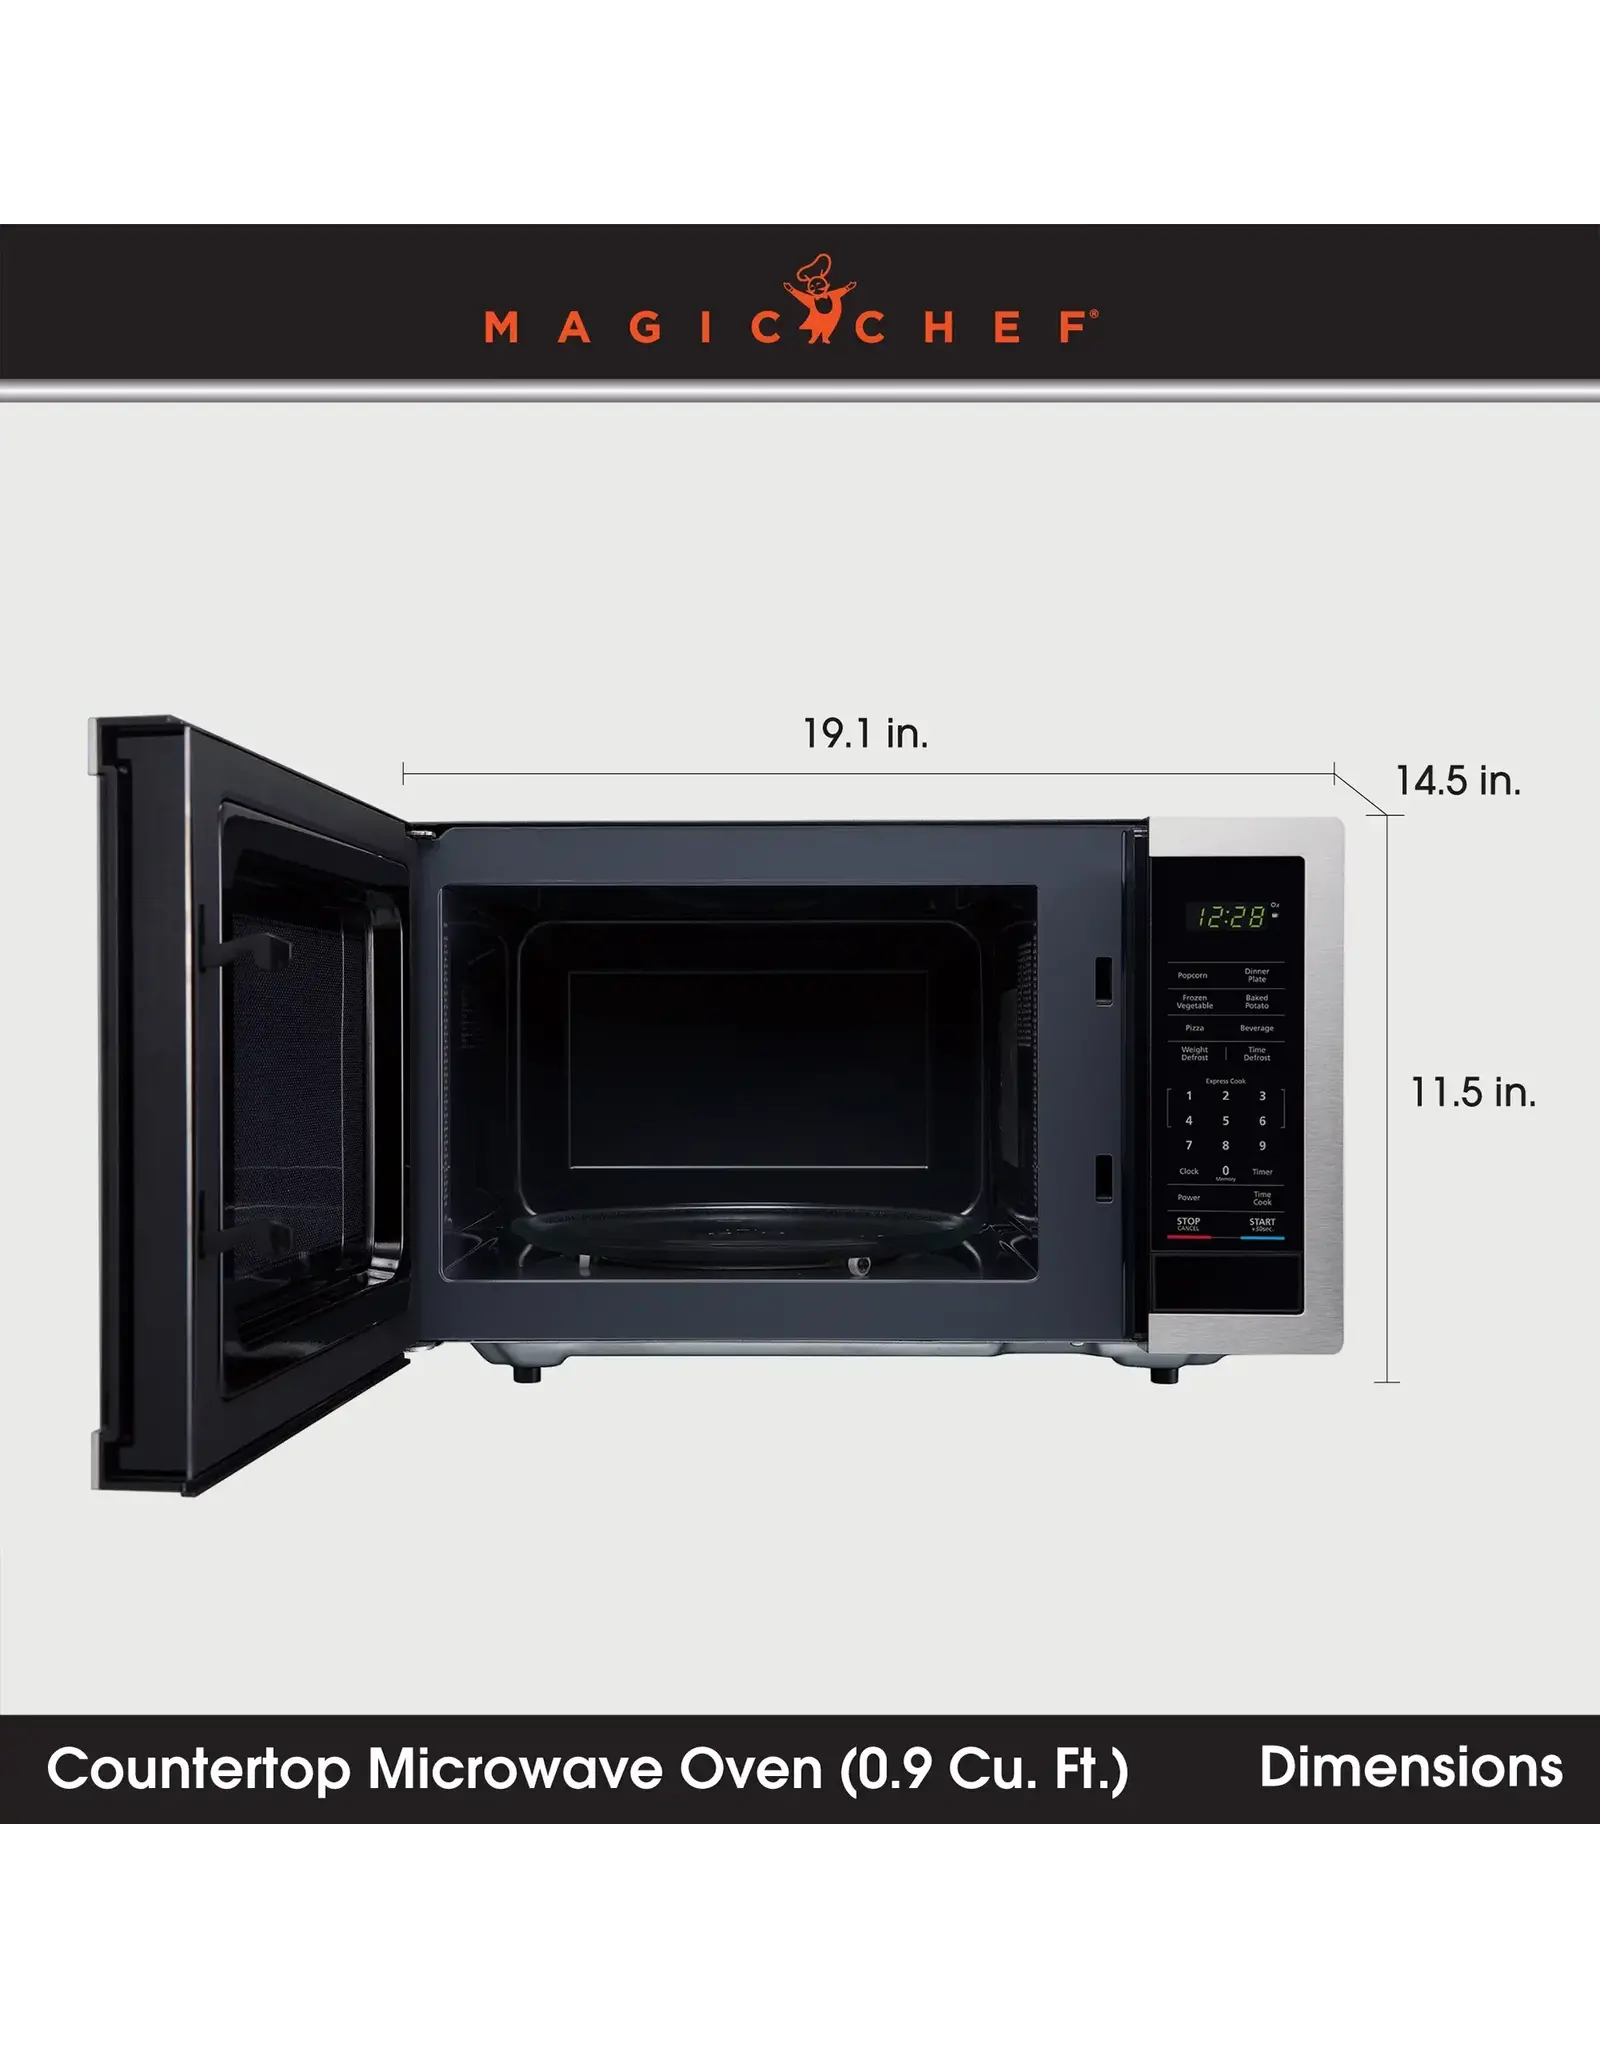 MAGIC CHEF Magic Chef MC99MST Countertop Microwave Oven, 900 Watts, Stainless Steel